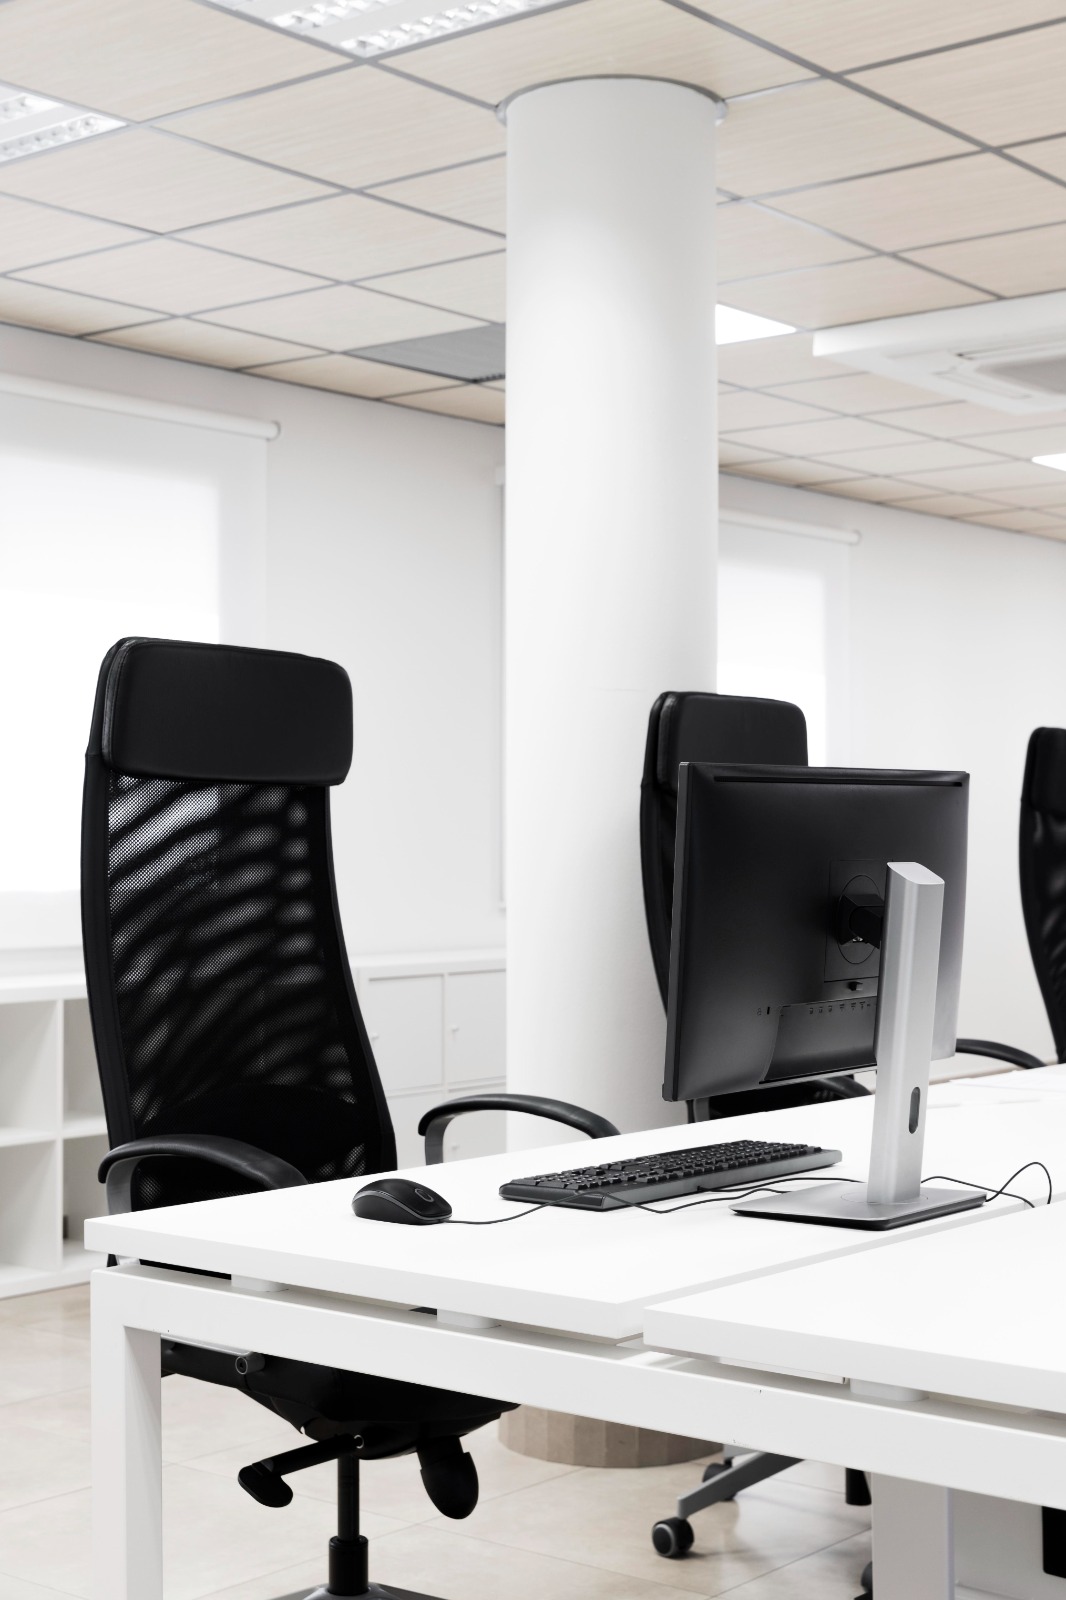 Modern office furniture in a well-lit workspace